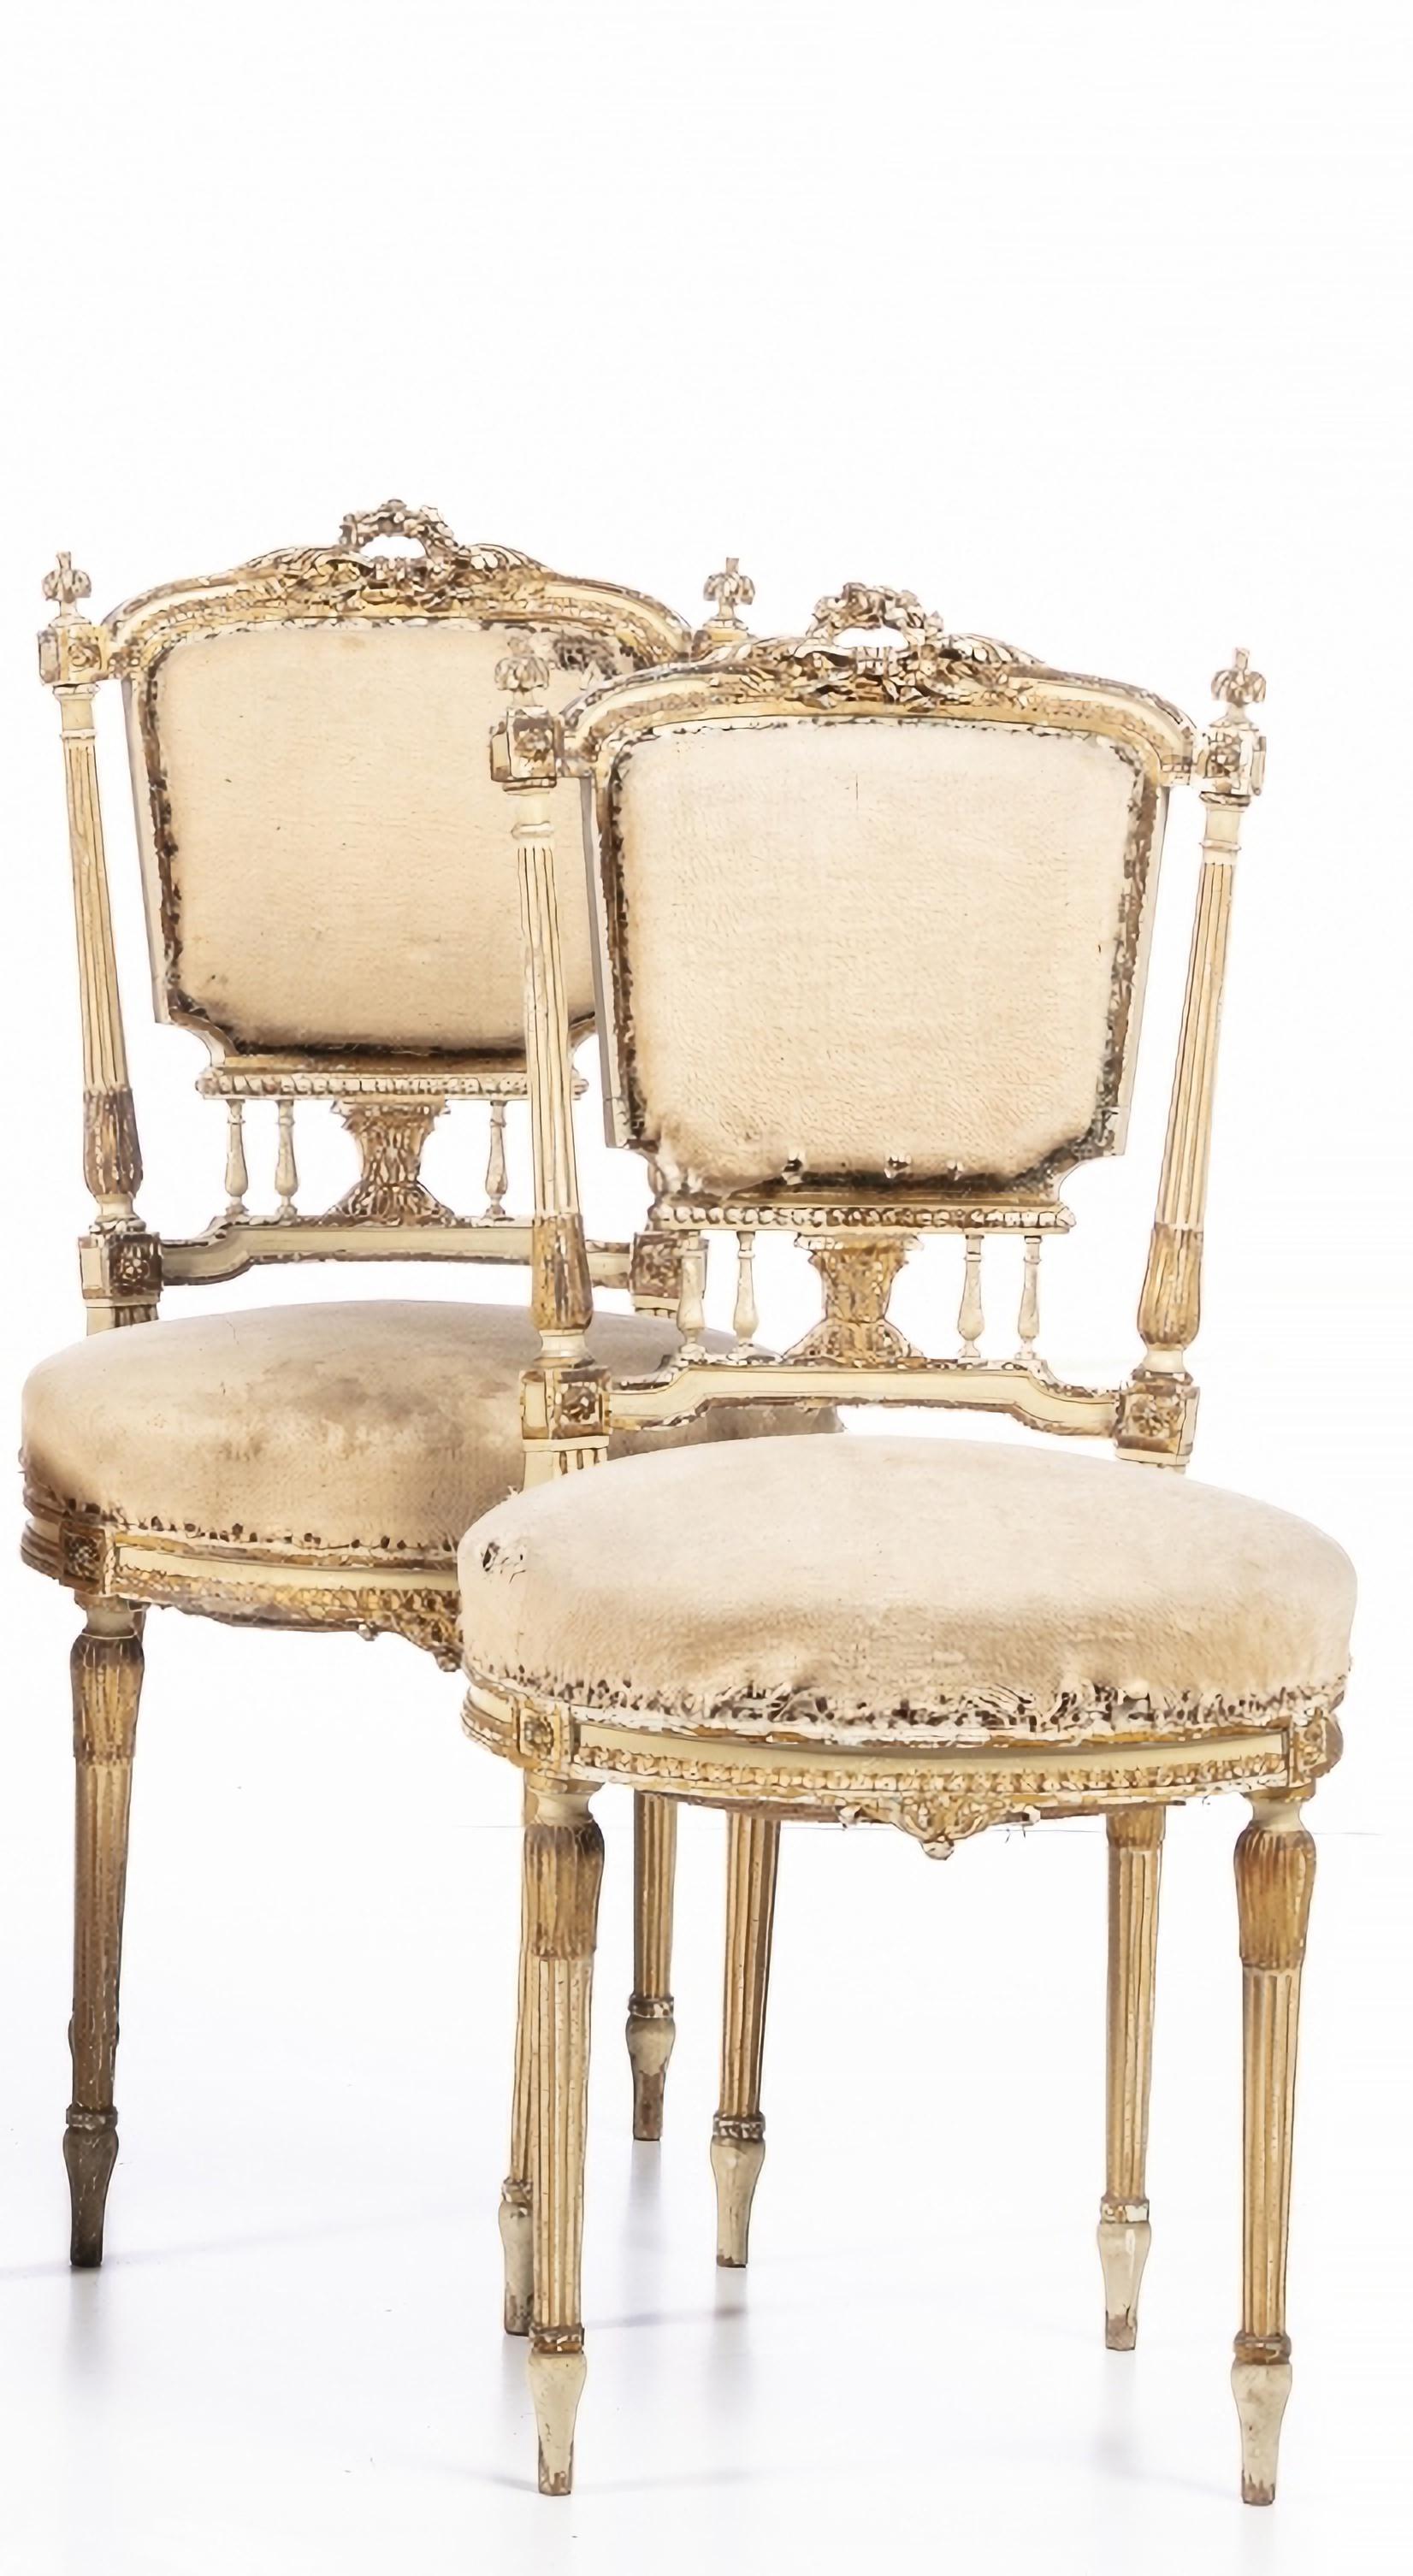 Set 5 French Chairs
Louis XV Style
19th Century
In painted and gilded carved wood. Upholstered seats and back.
Faults and defects.
To restored
Dim.: (larger) 96 x 52 x 42 cm.